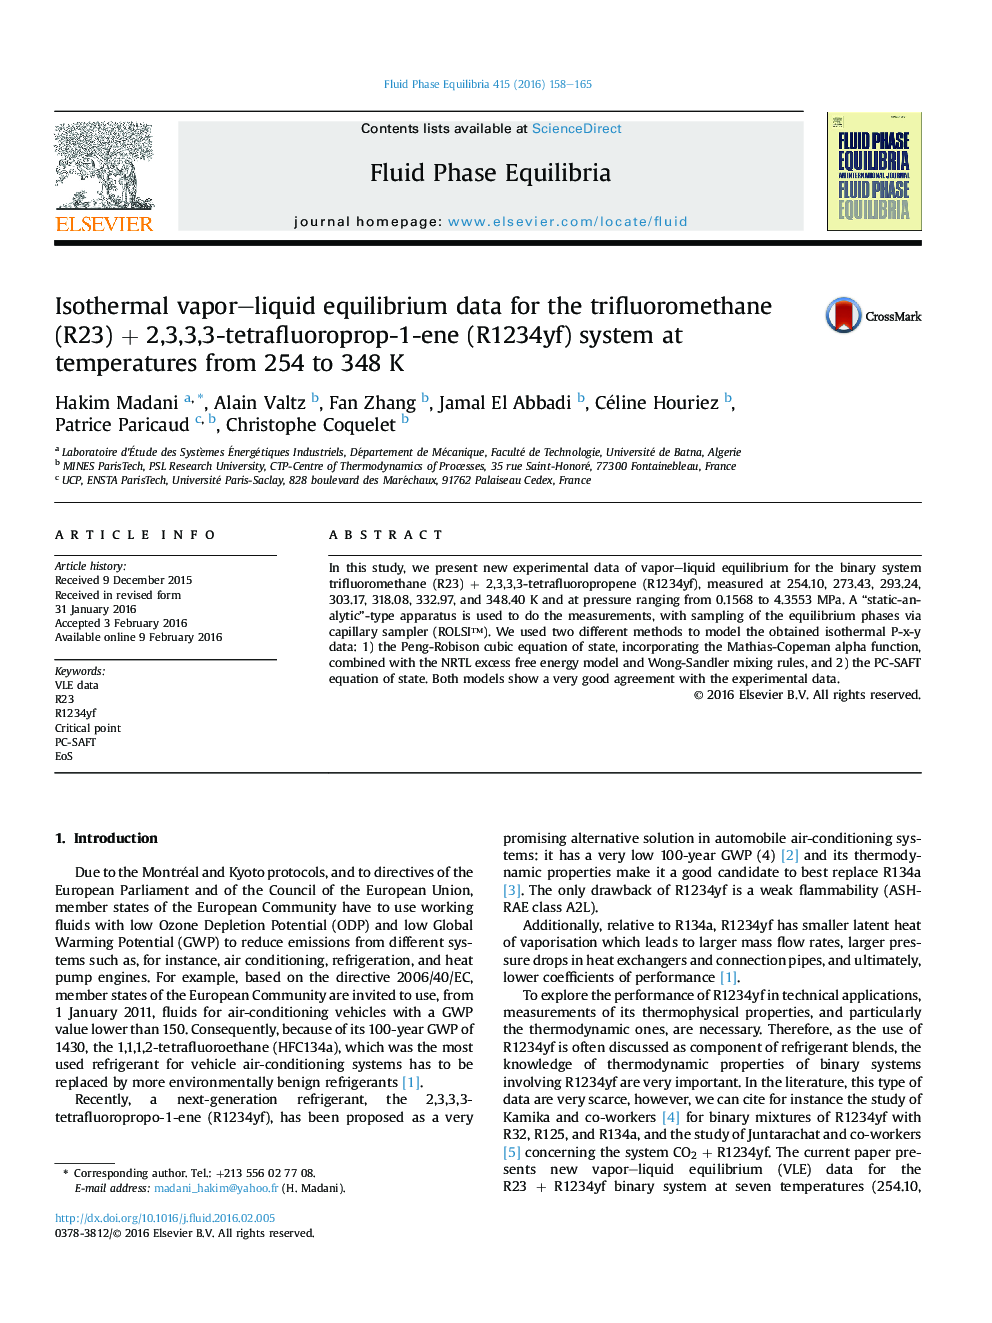 Isothermal vapor–liquid equilibrium data for the trifluoromethane (R23) + 2,3,3,3-tetrafluoroprop-1-ene (R1234yf) system at temperatures from 254 to 348 K